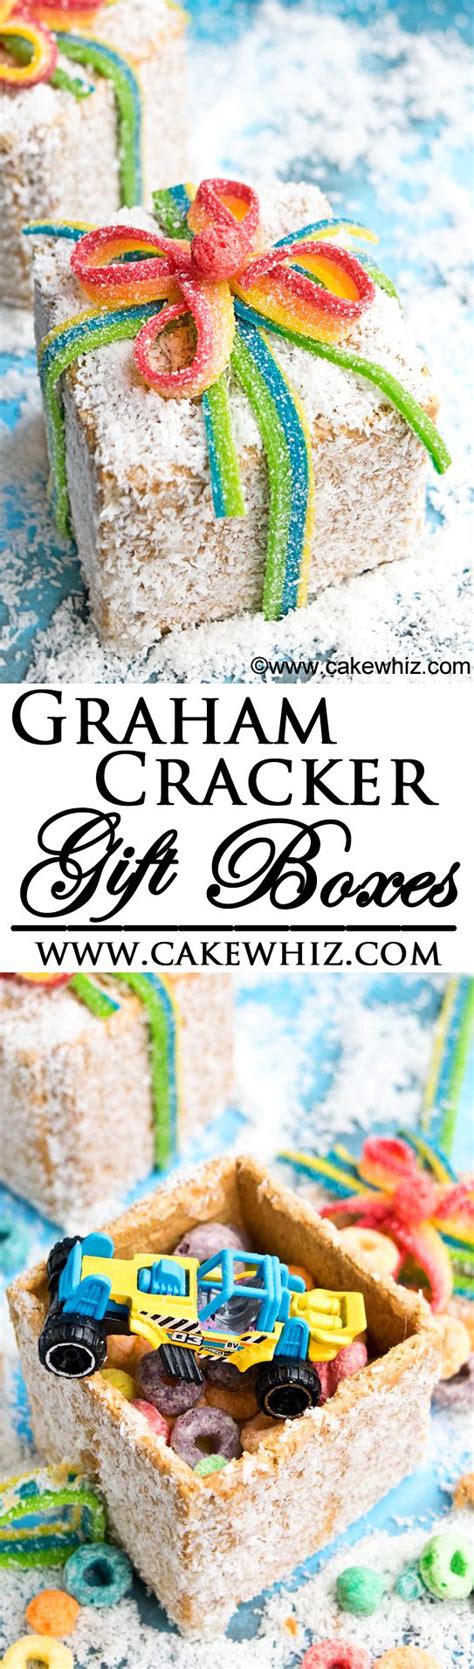 Please check box to accept terms and conditions and submit. Fun and completely edible GRAHAM CRACKER GIFT BOXES with ...